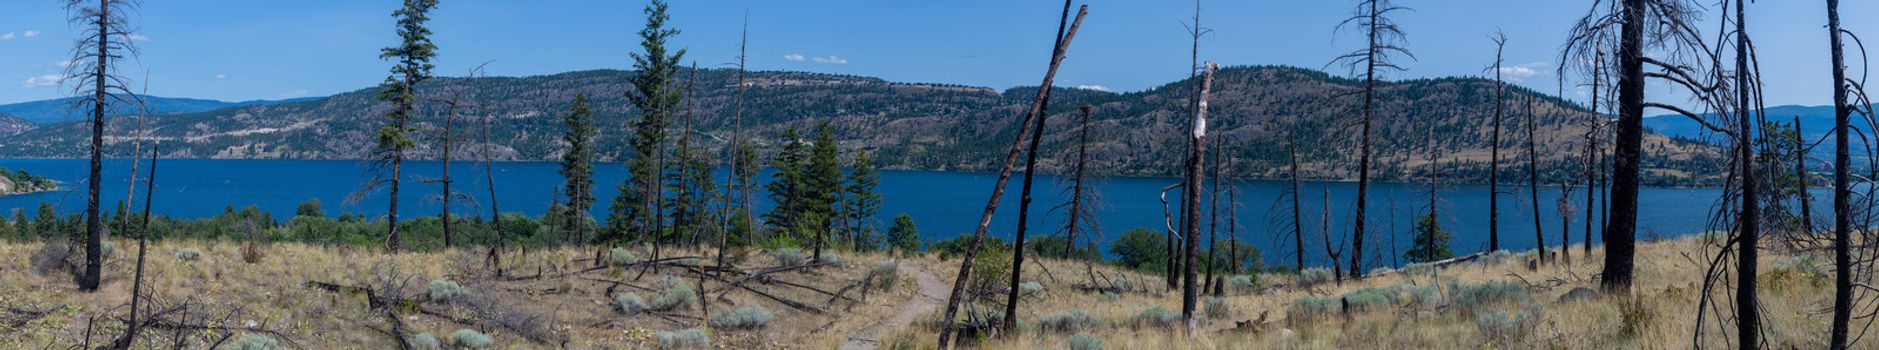 Panorama of Okanogan Lake mountains in Kelowna, British Columbia, Canada on a sunny day looking at burned forest, dry ground and the lake.